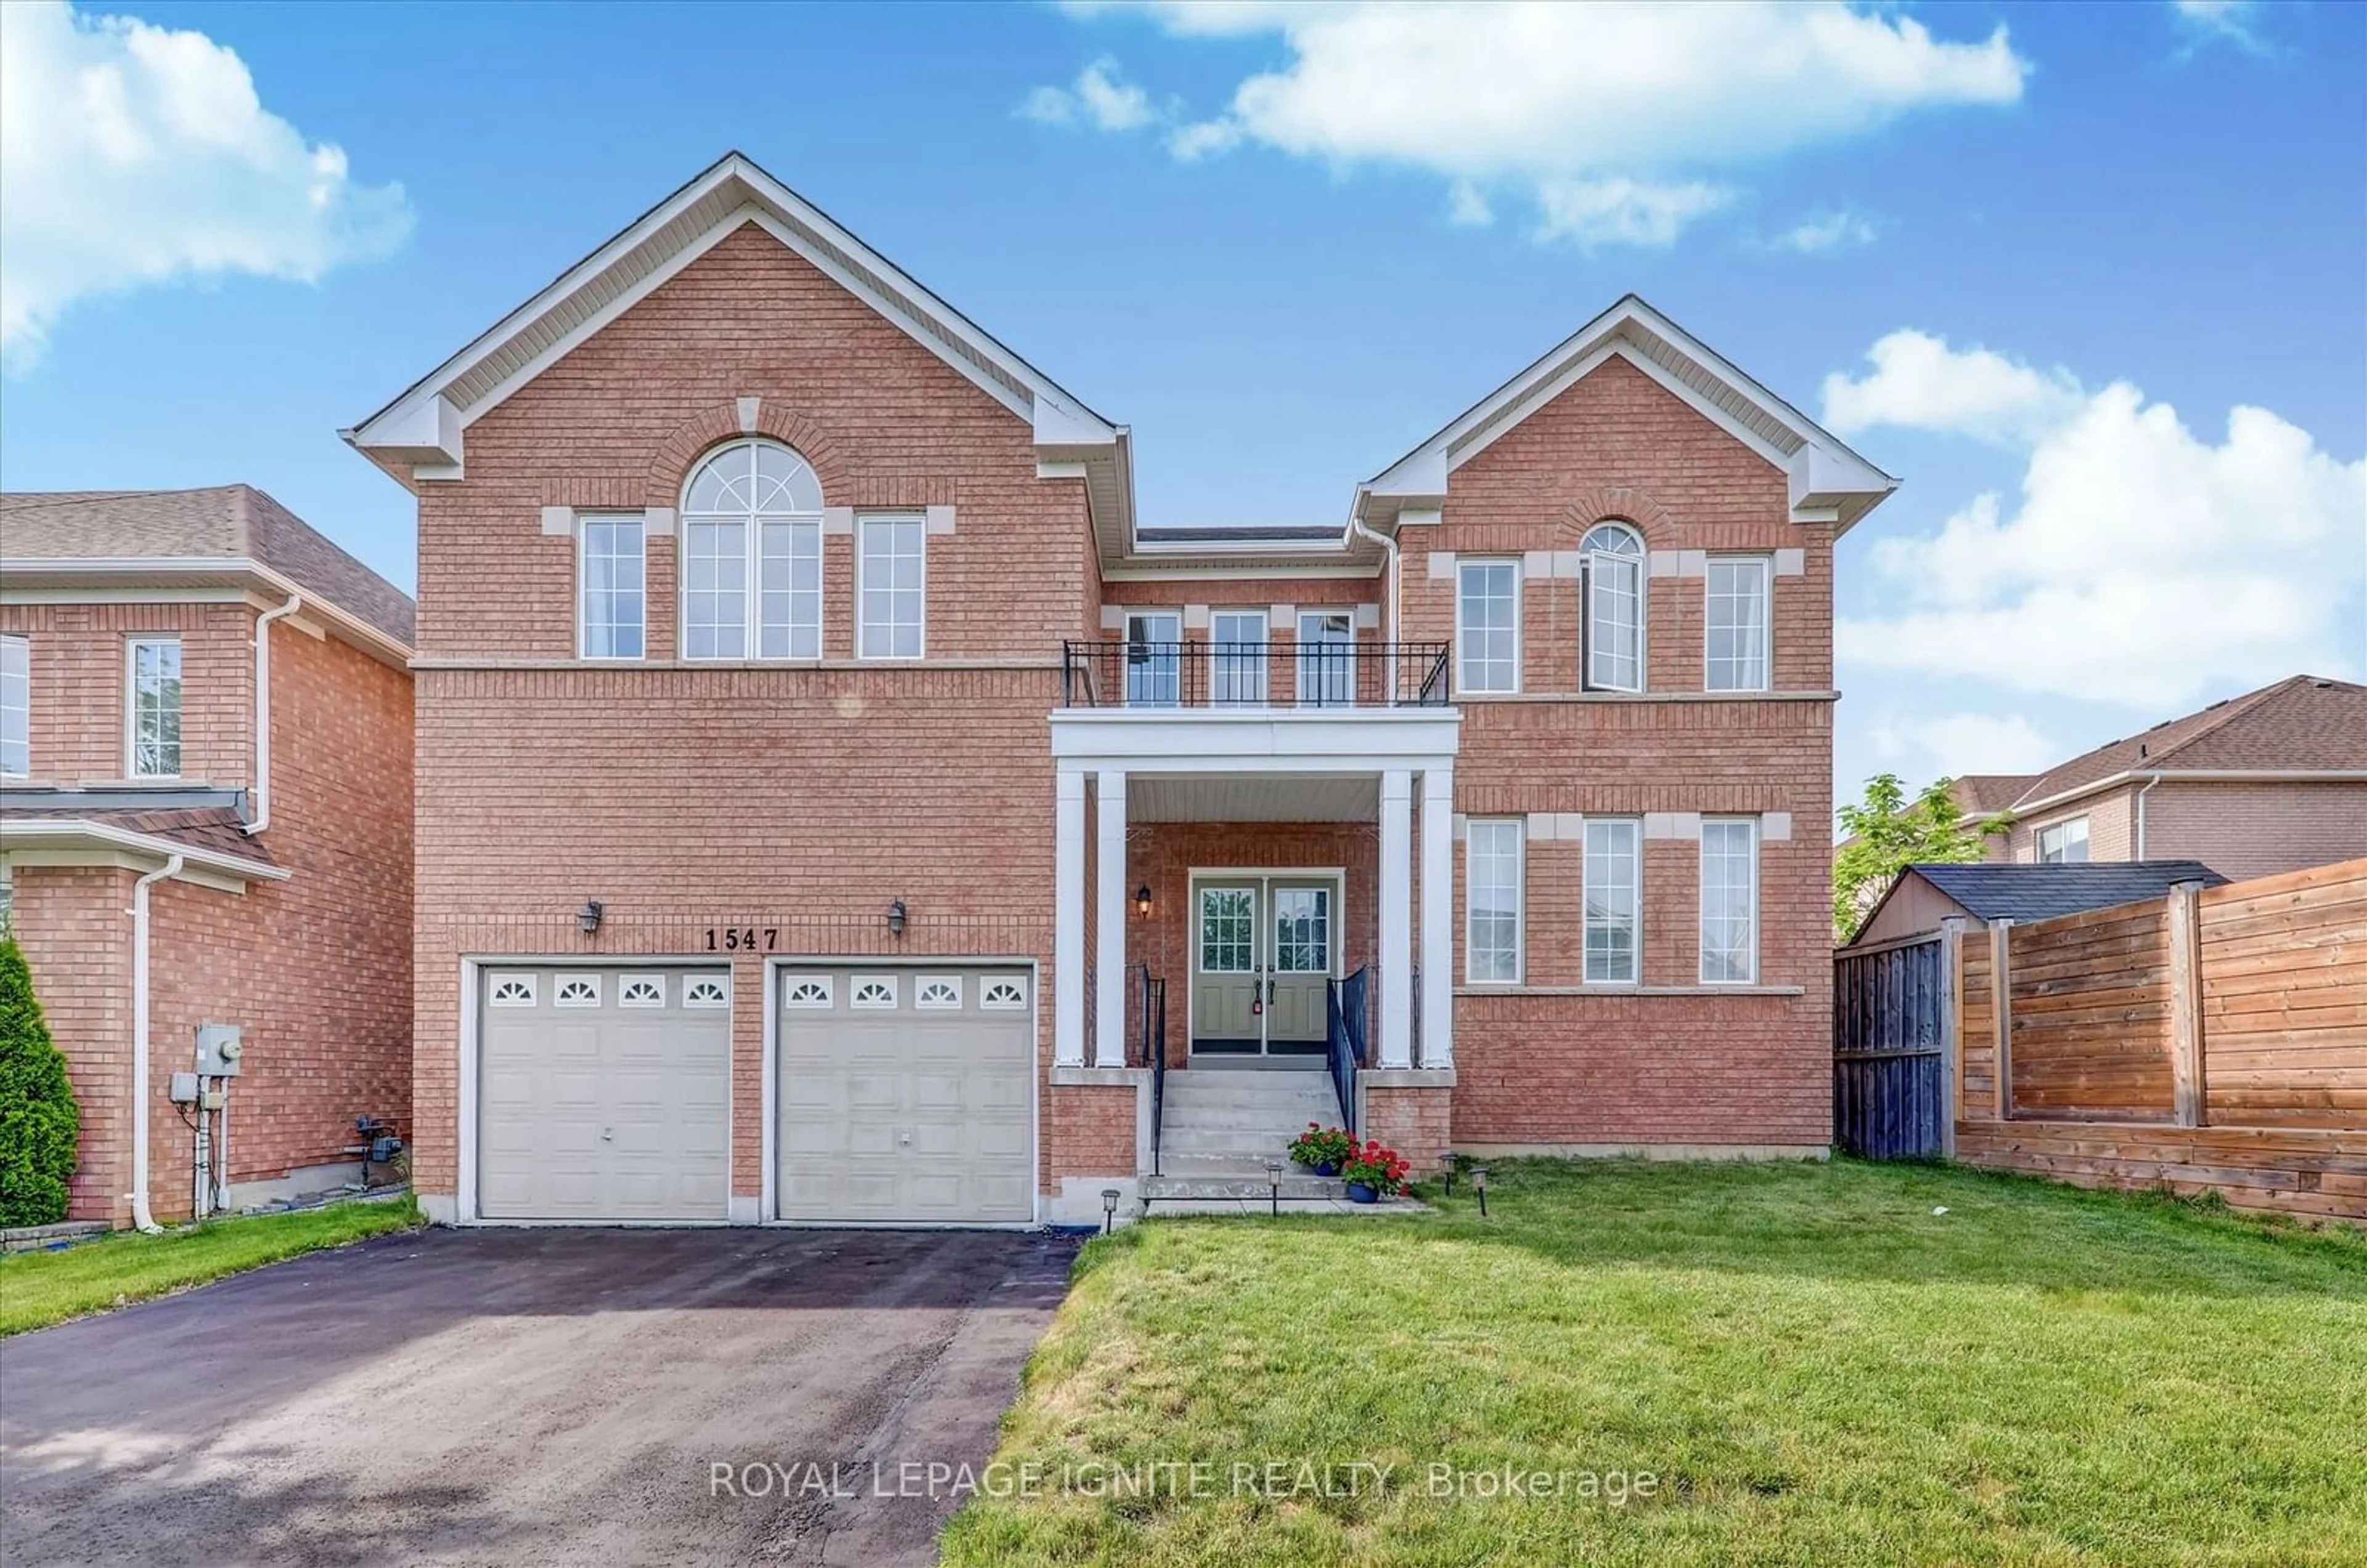 Home with brick exterior material for 1547 Spencely Dr, Oshawa Ontario L1K 0A7